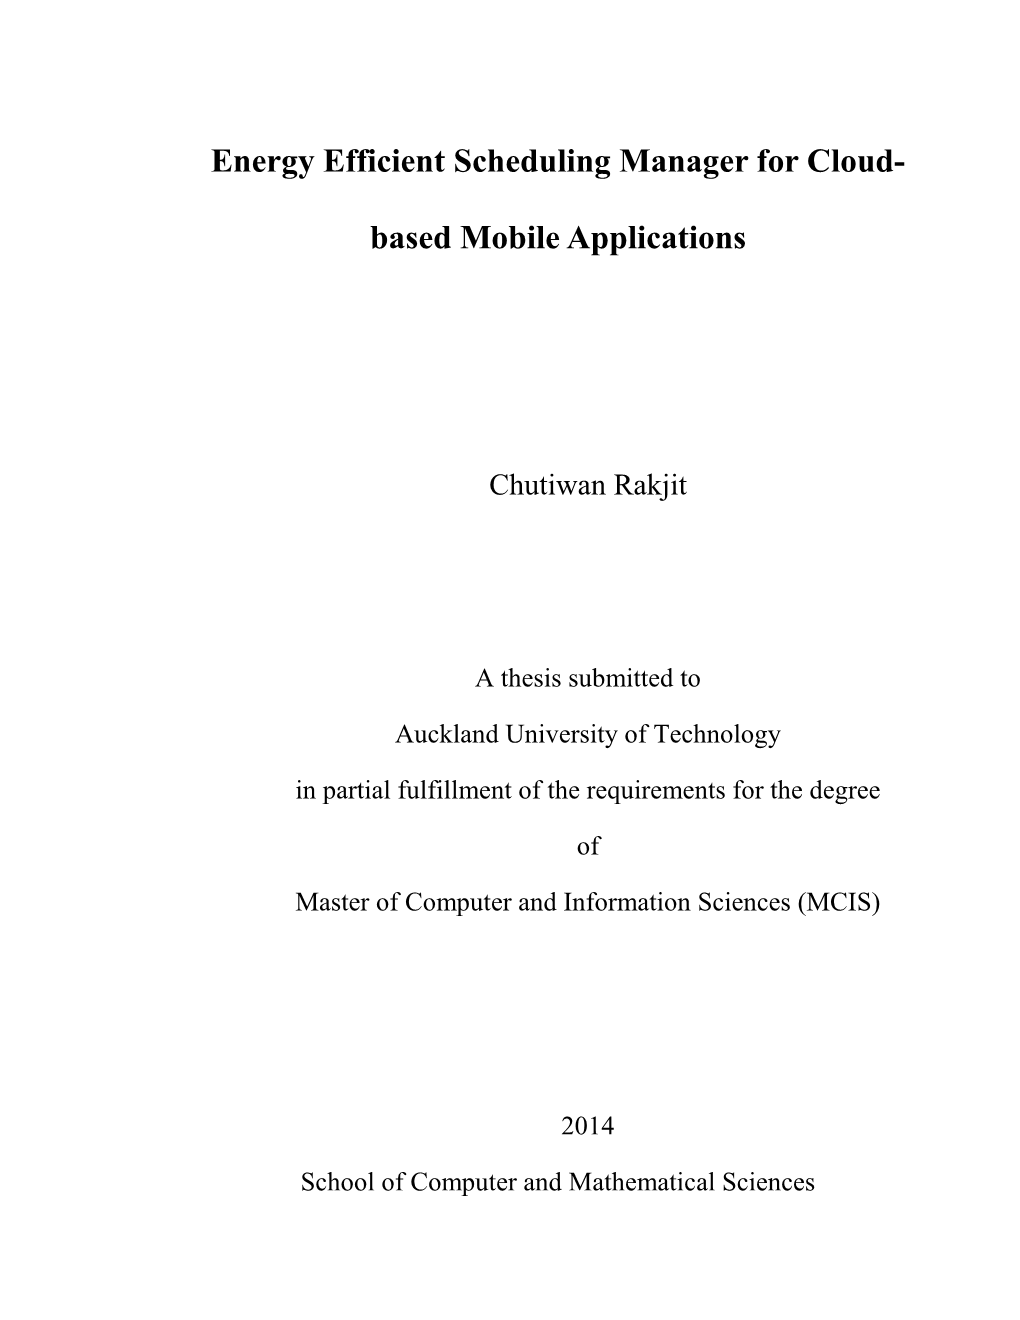 Energy Efficient Scheduling Manager for Cloud- Based Mobile Applications